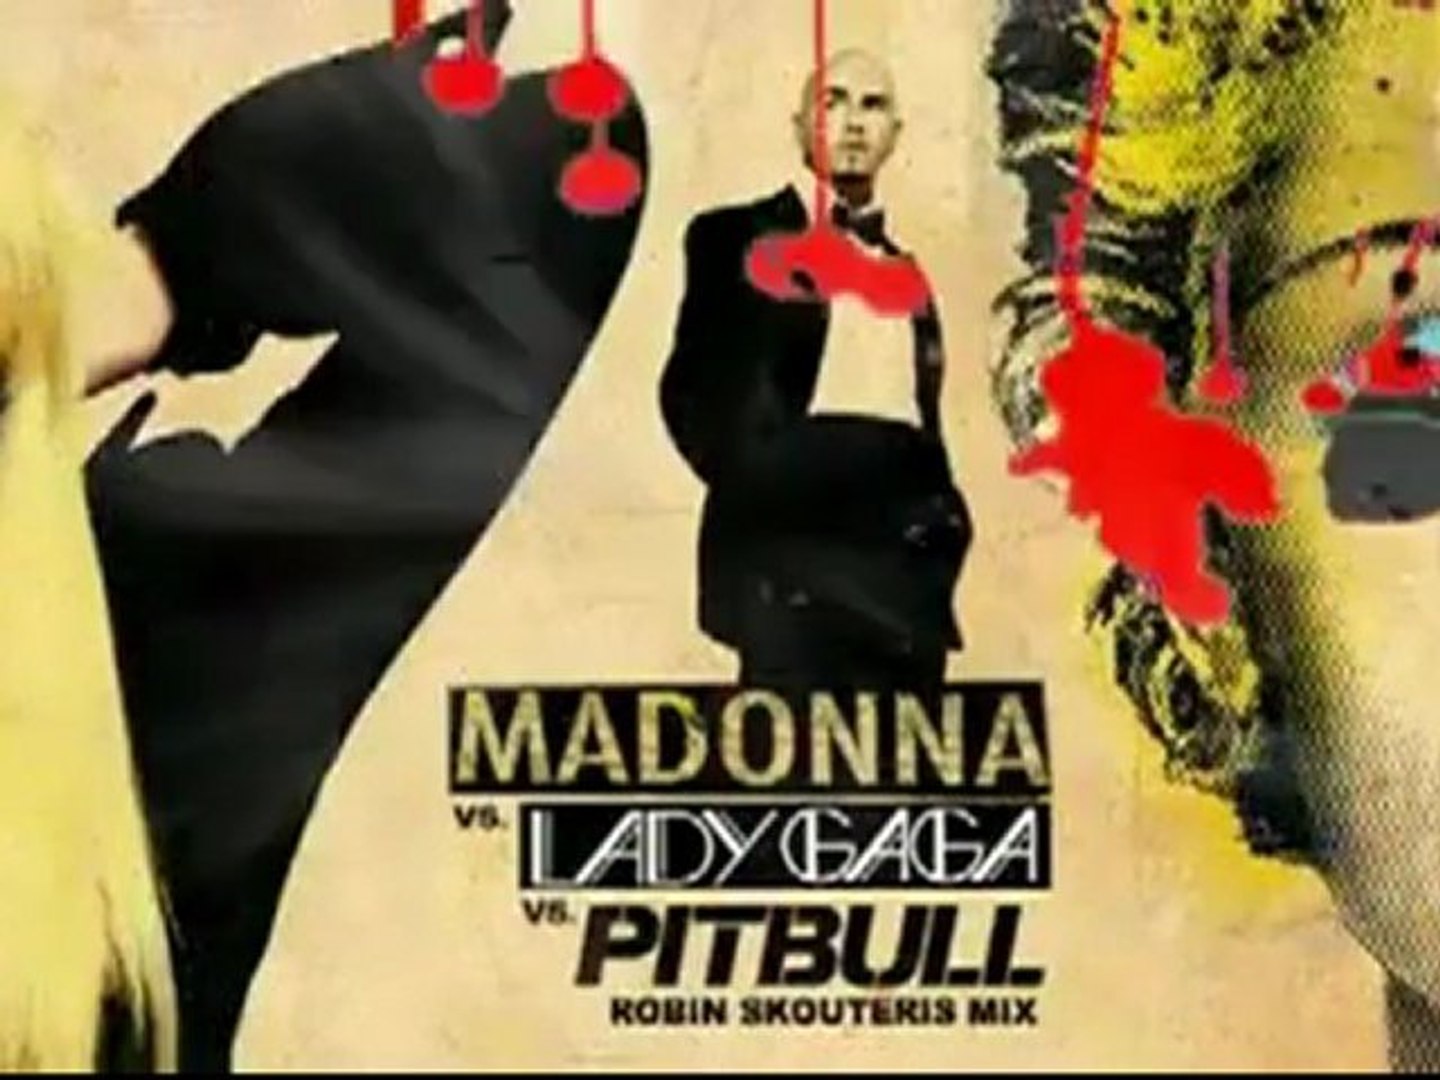 Lady GaGa feat. Pitbull and Madonna - You Know I Want Love Celebration [HQ]  - Vídeo Dailymotion